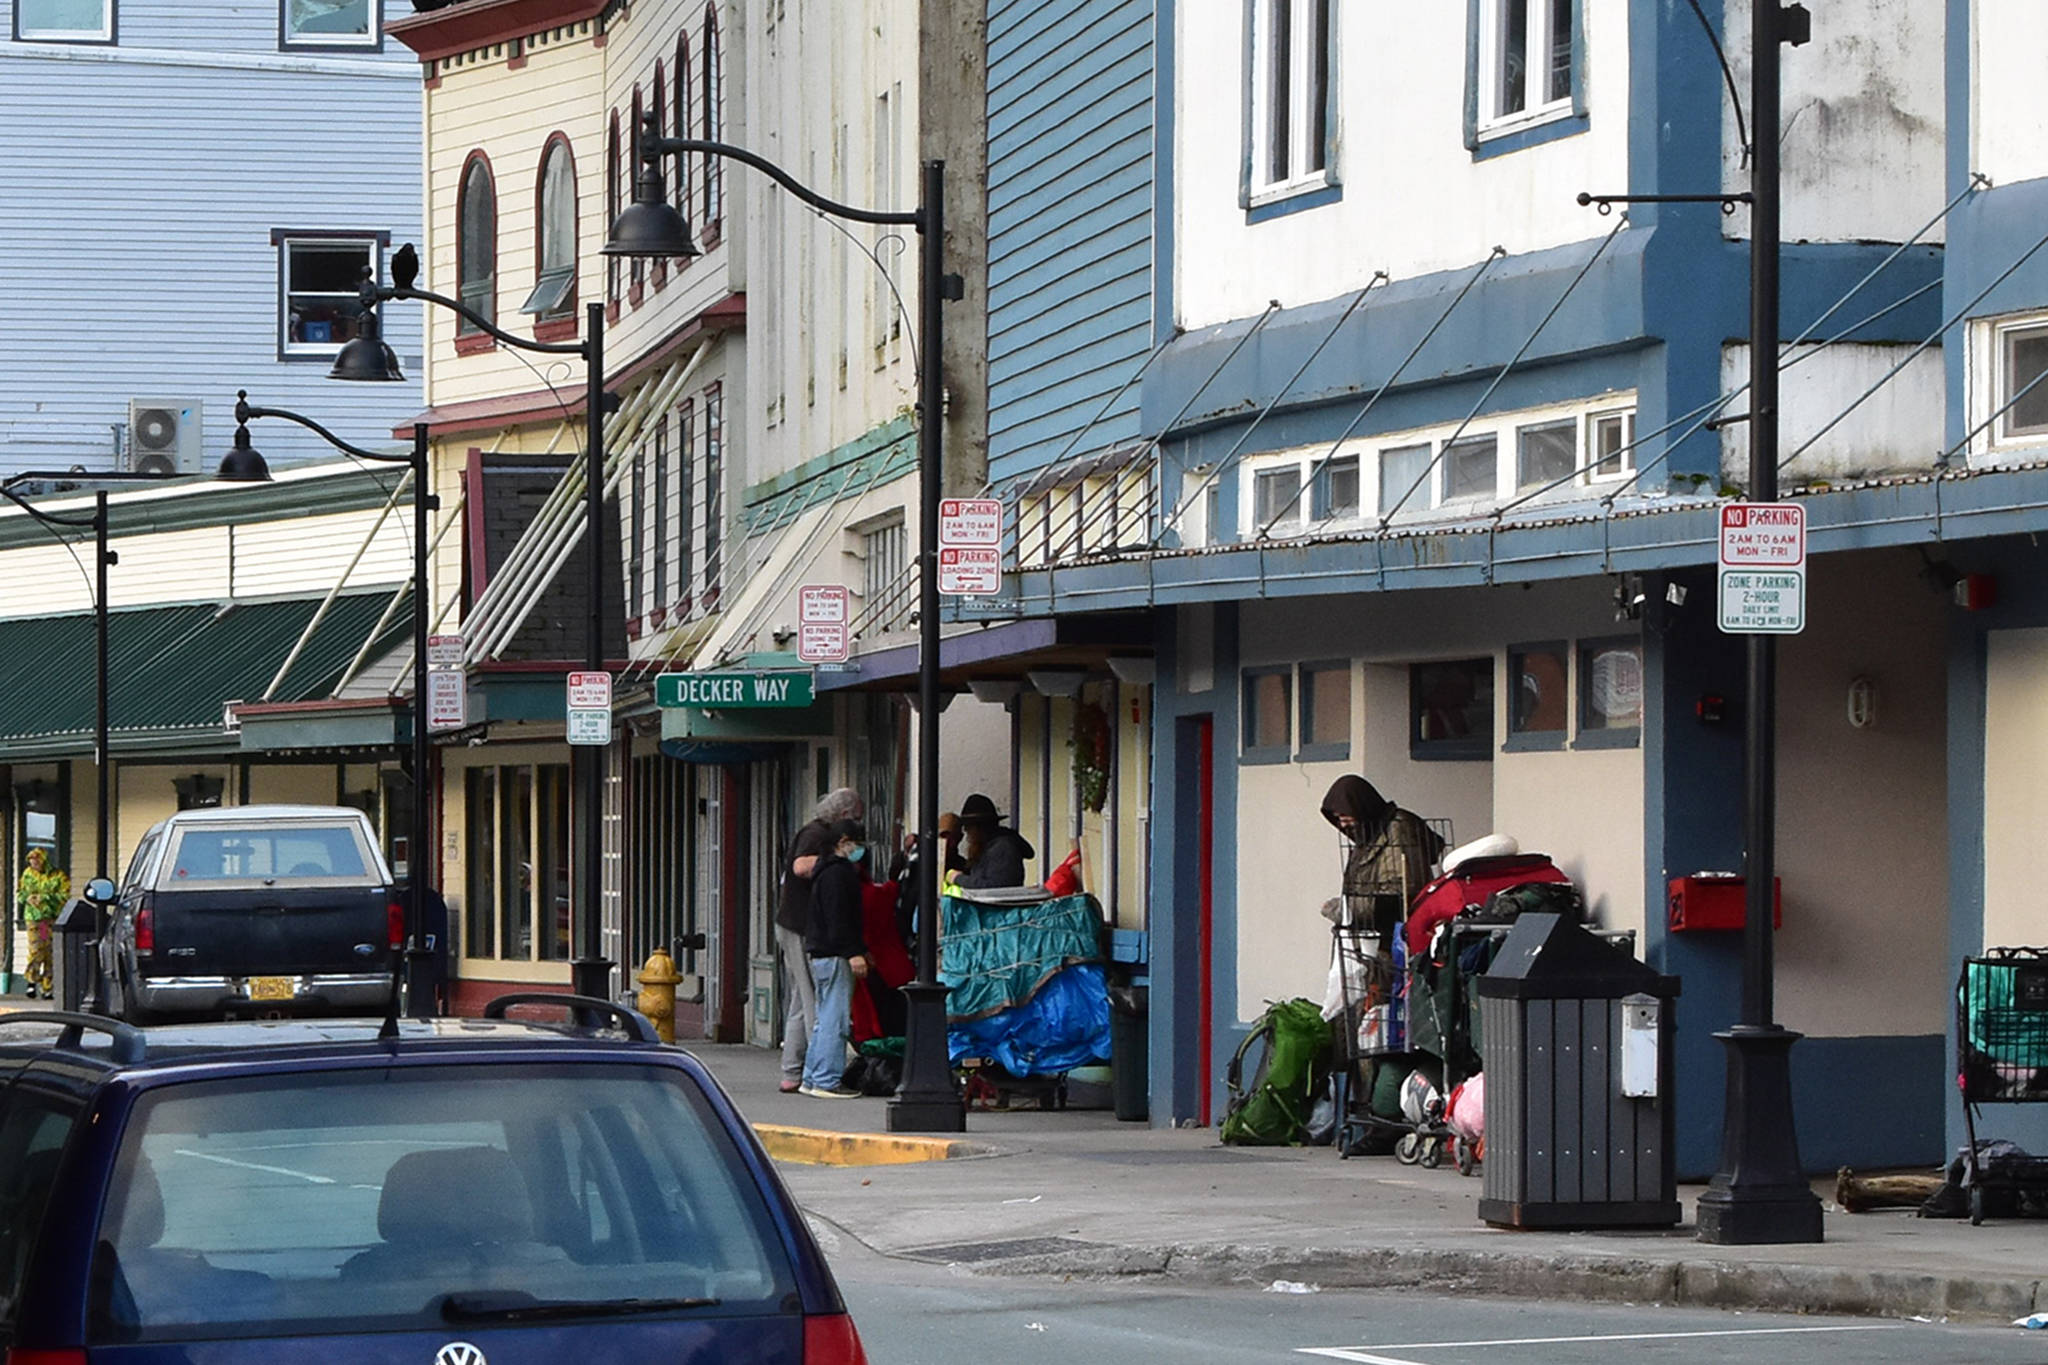 People mill outside the Glory Hall on South Franklin Street on Wednesday, Oct. 7. The Glory Hall was one of four organizations in Juneau to jointly receive nearly $1 million in grant funding from the Alaska Housing Financial Corporation. (Peter Segall / Juneau Empire)